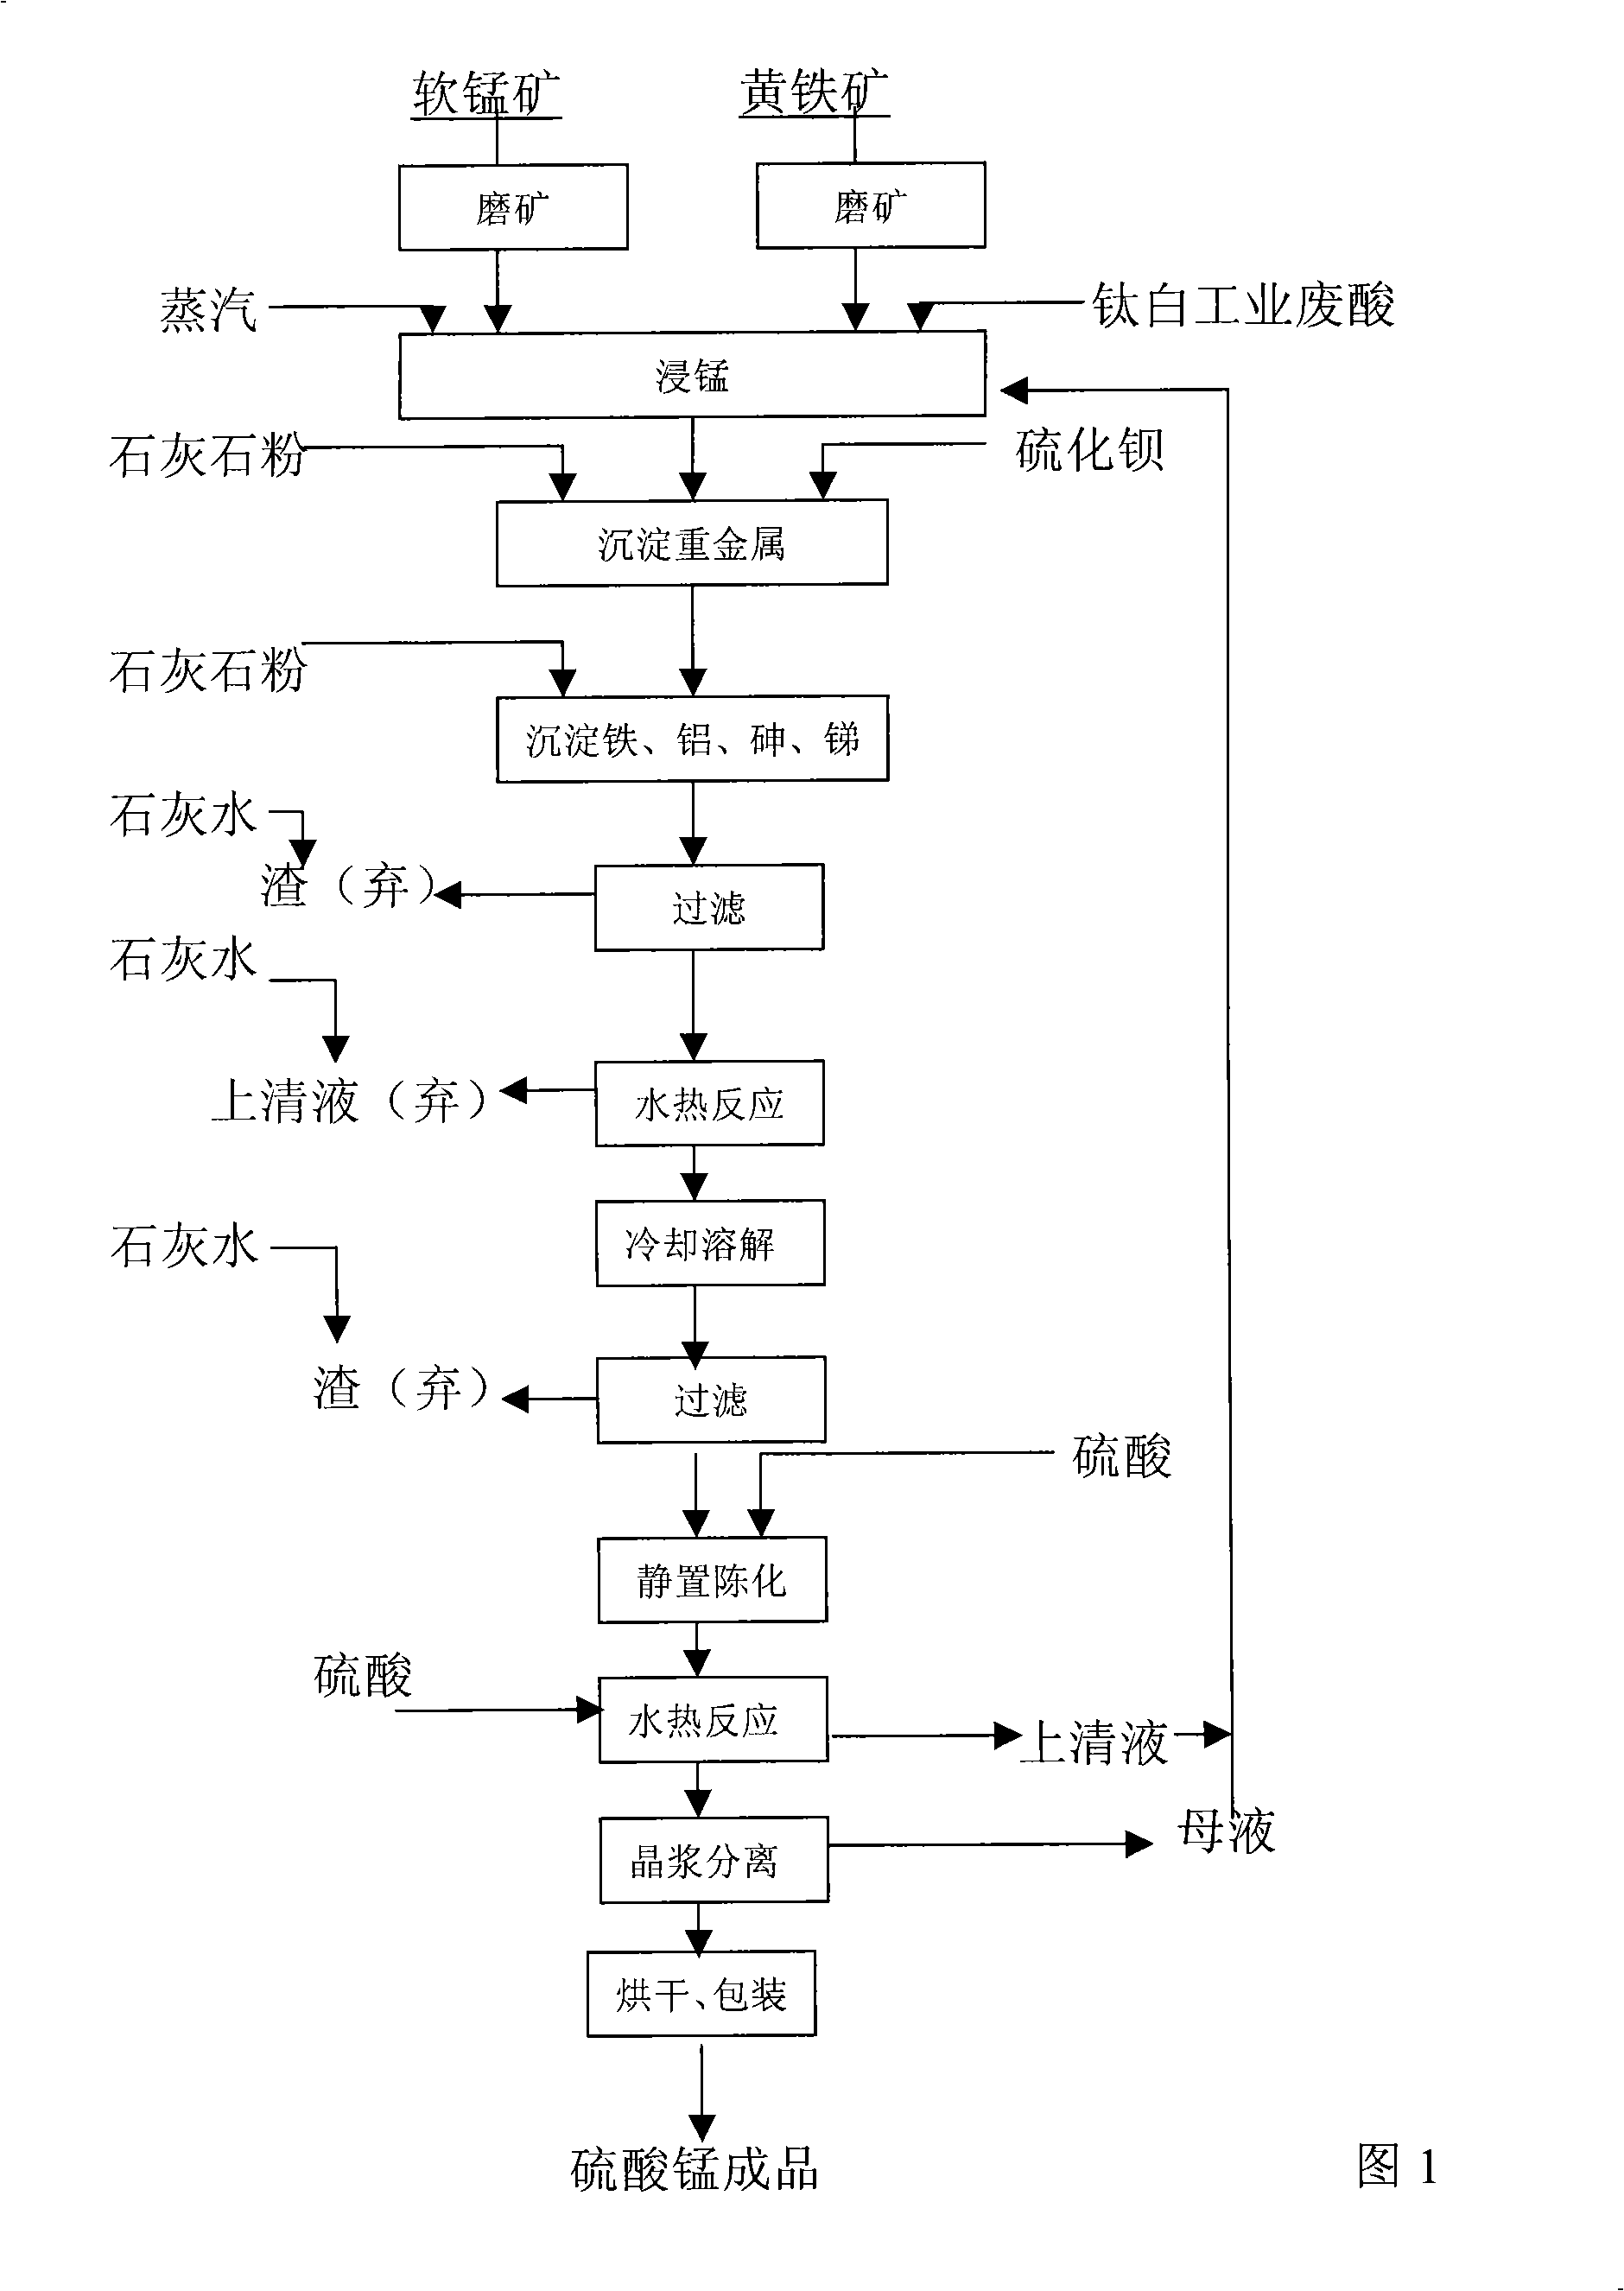 Method for producing manganese sulfate monohydrate crystal using pyrolusite and waste acid as raw material